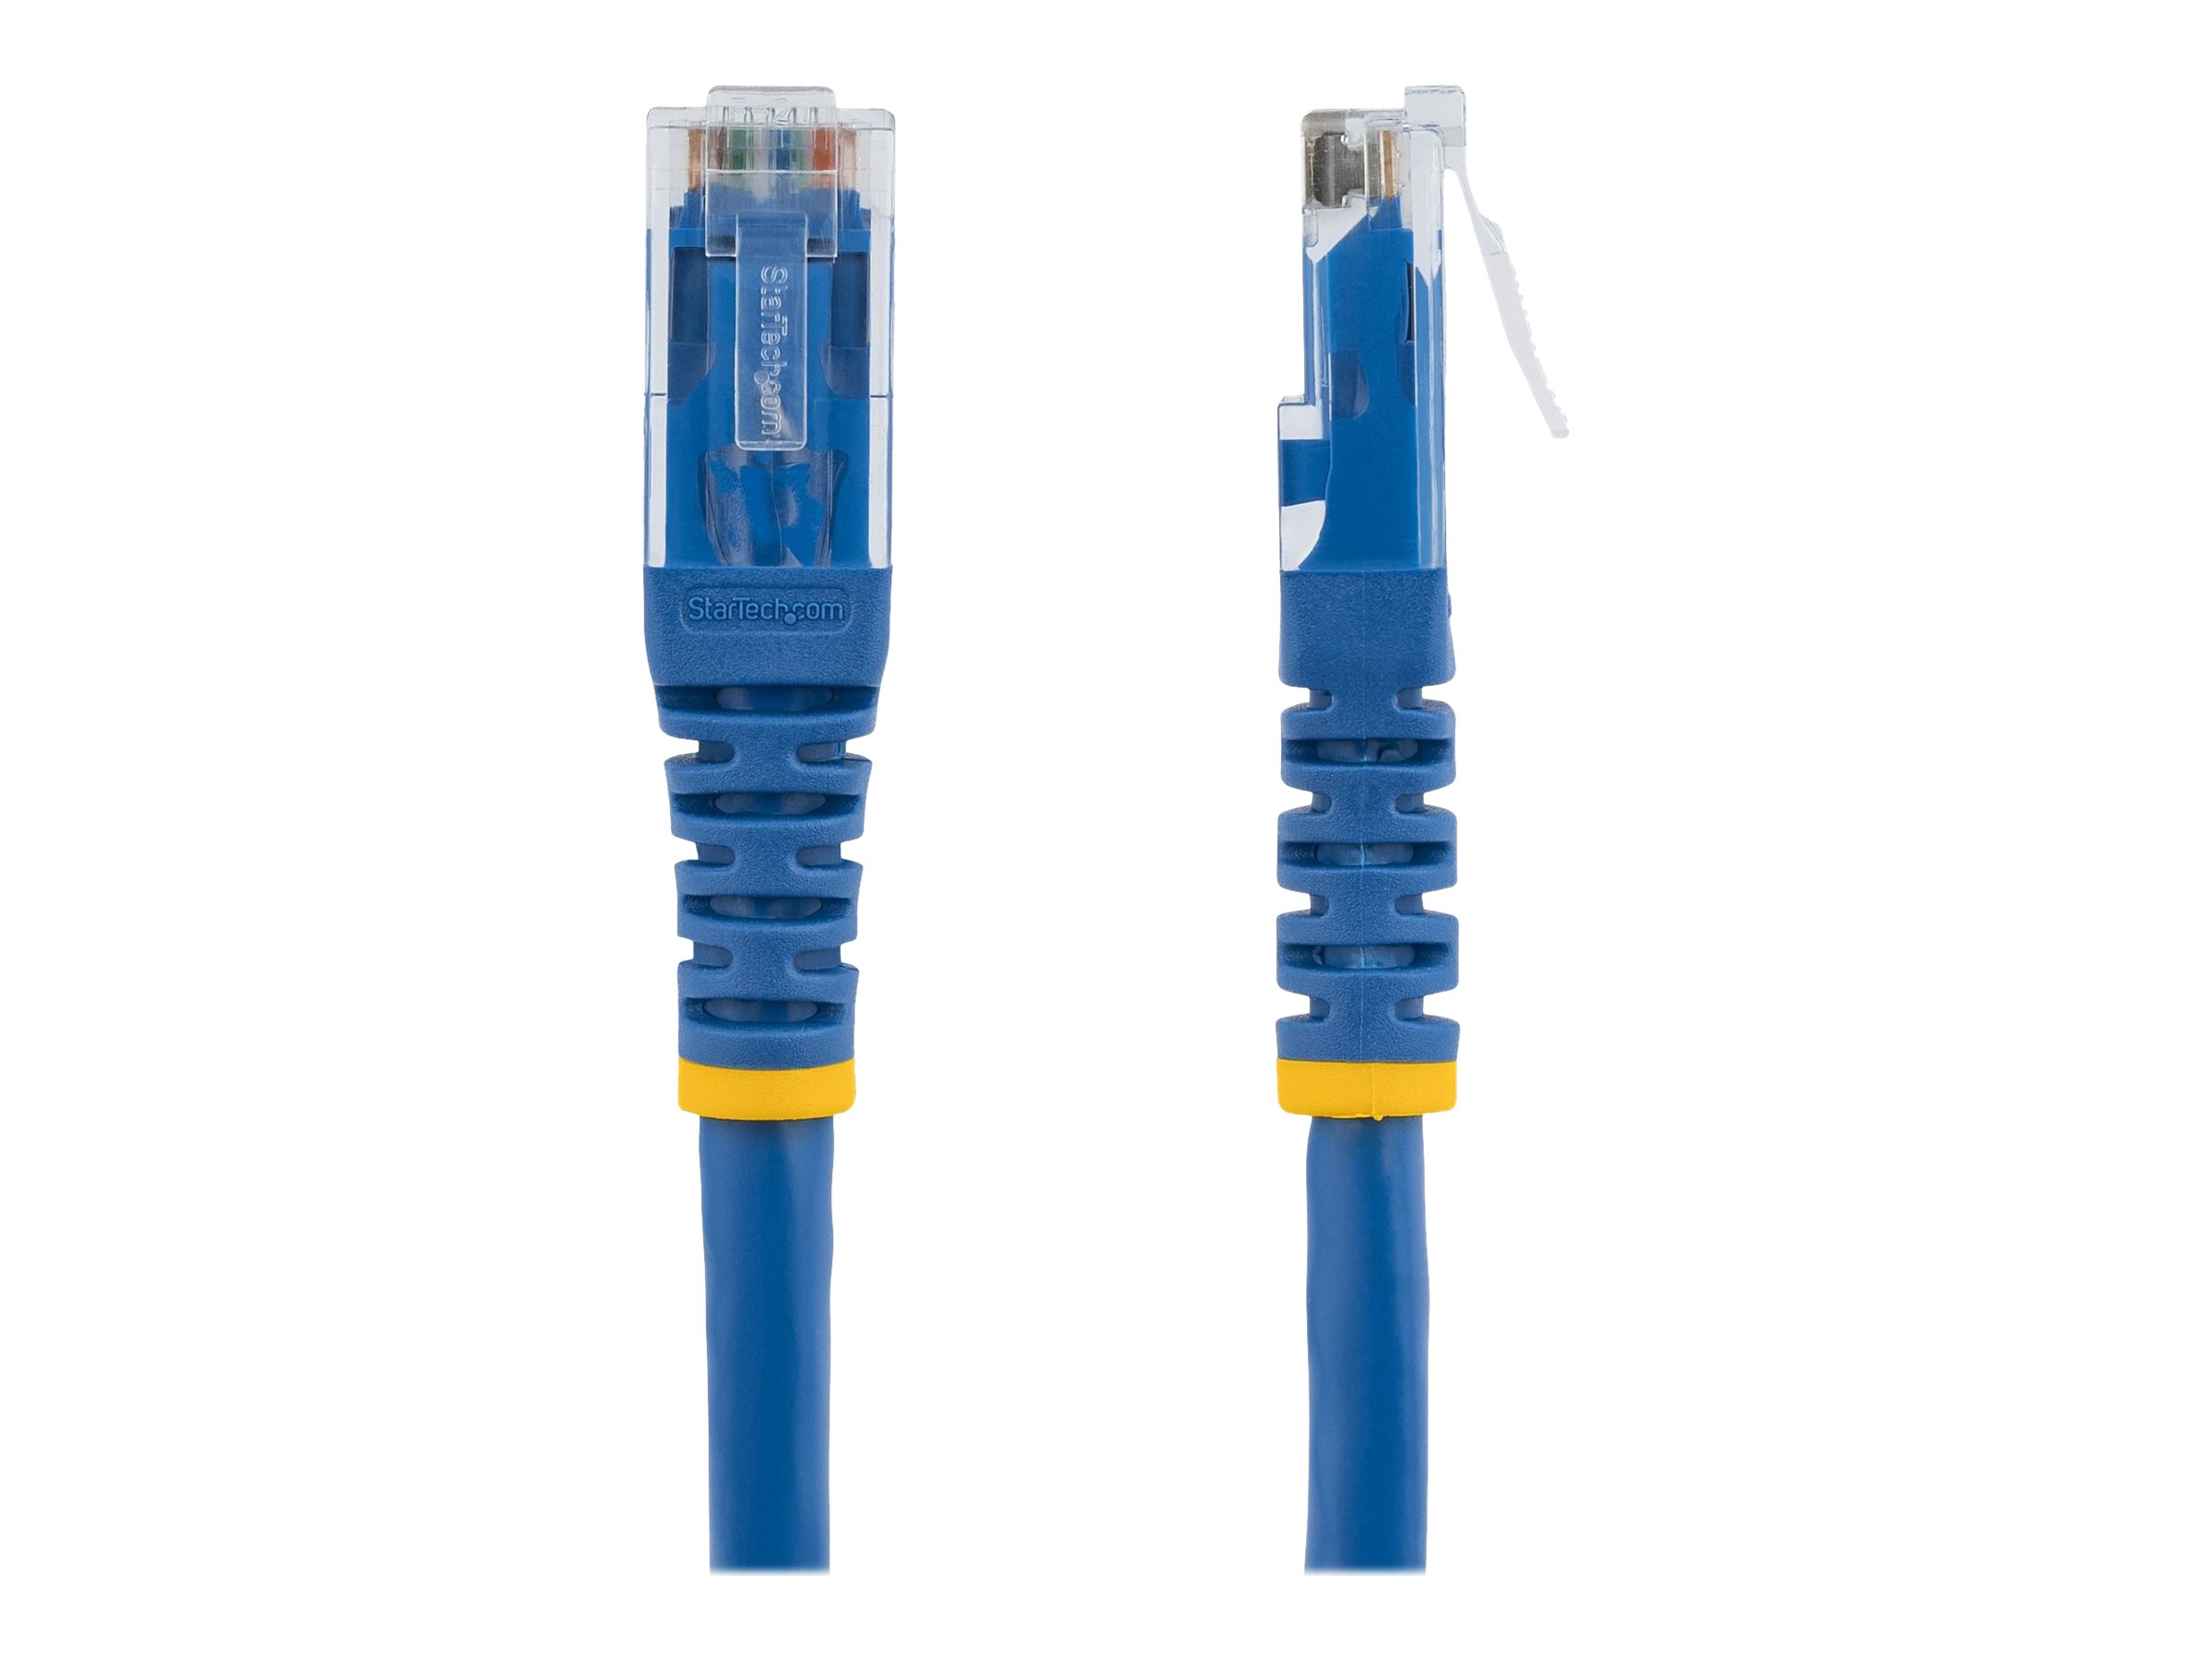 StarTech.com 7ft CAT6 Ethernet Cable, 10 Gigabit Molded RJ45 650MHz 100W PoE Patch Cord, CAT 6 10GbE UTP Network Cable with Strain Relief, Blue, Fluke Tested/Wiring is UL Certified/TIA